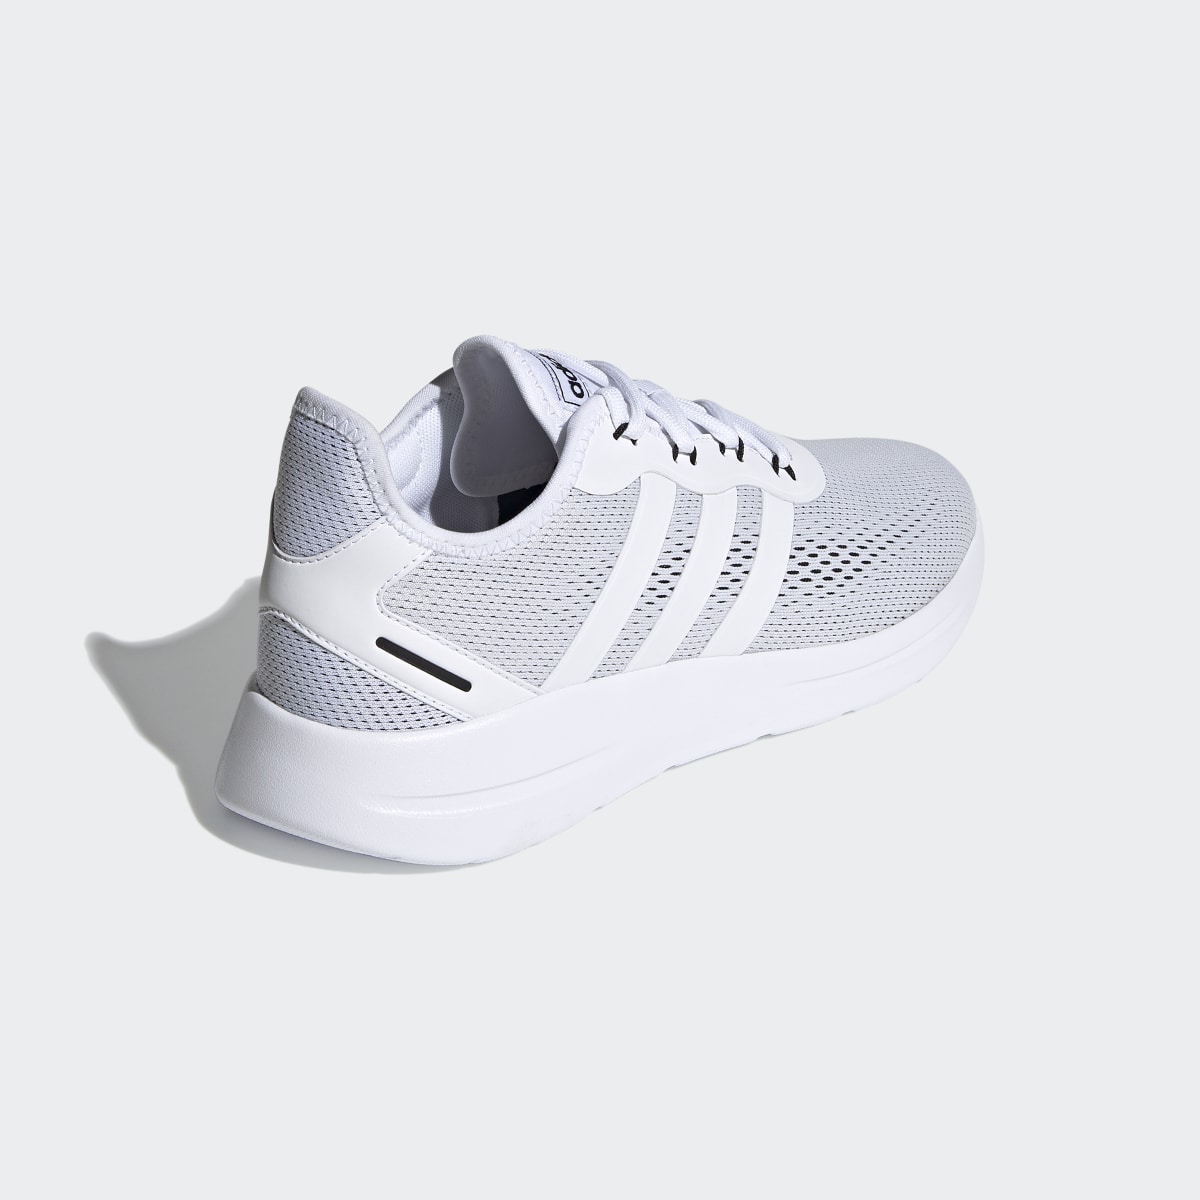 Adidas Lite Racer RBN 2.0 Shoes. 6